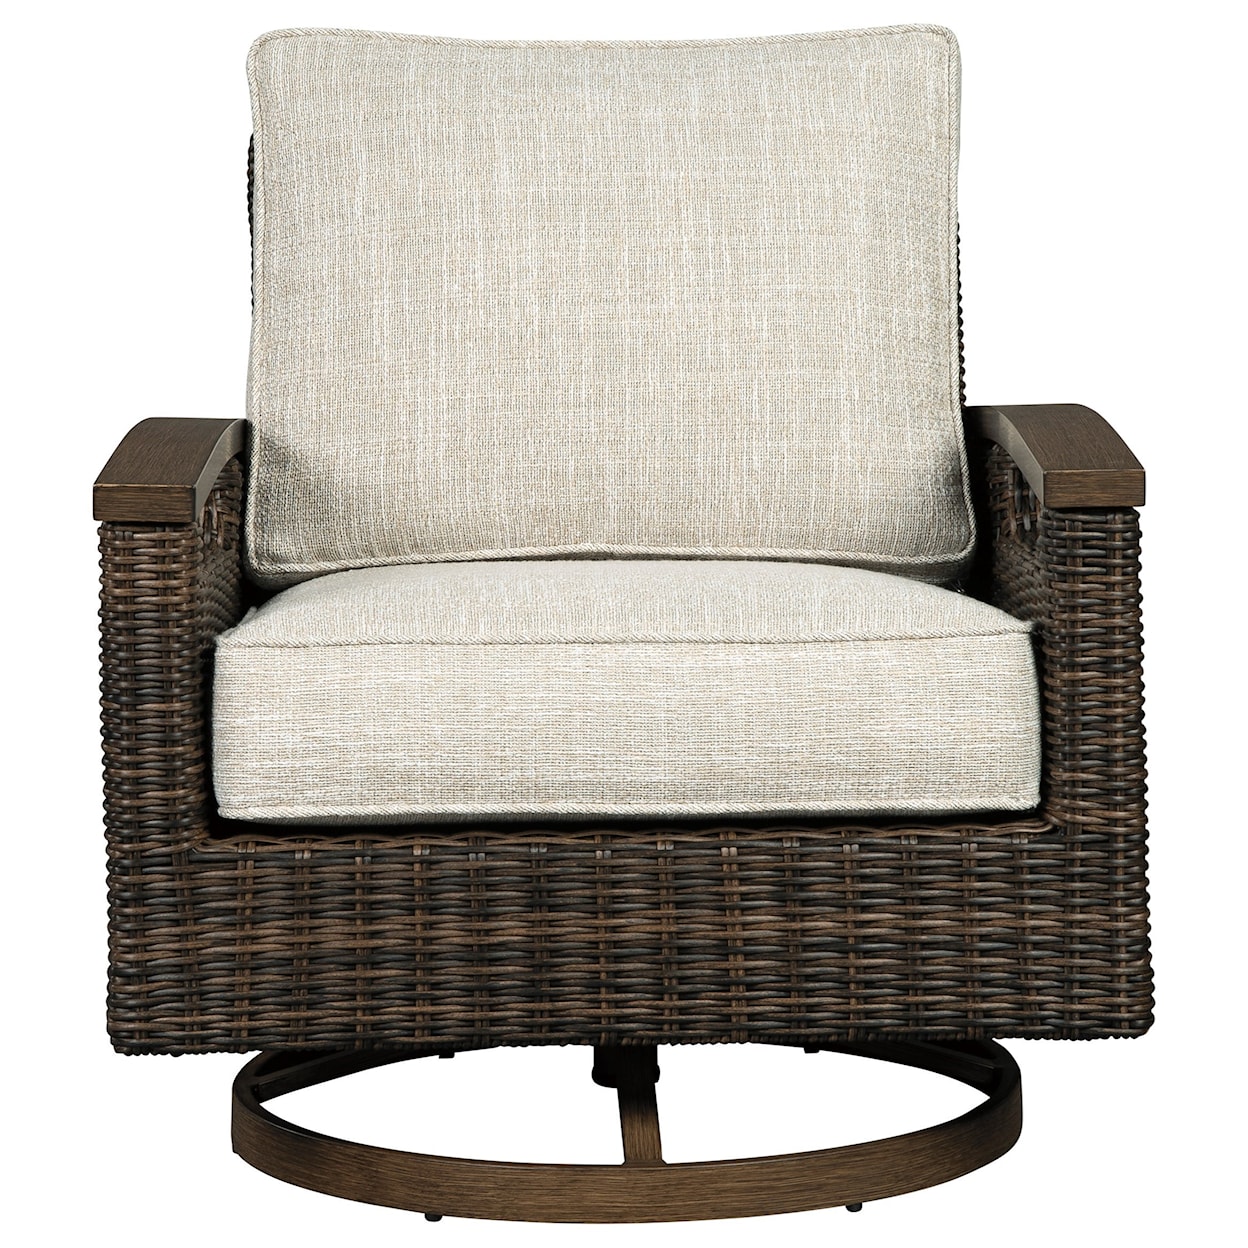 Signature Design by Ashley Paradise Trail Swivel Lounge Chair